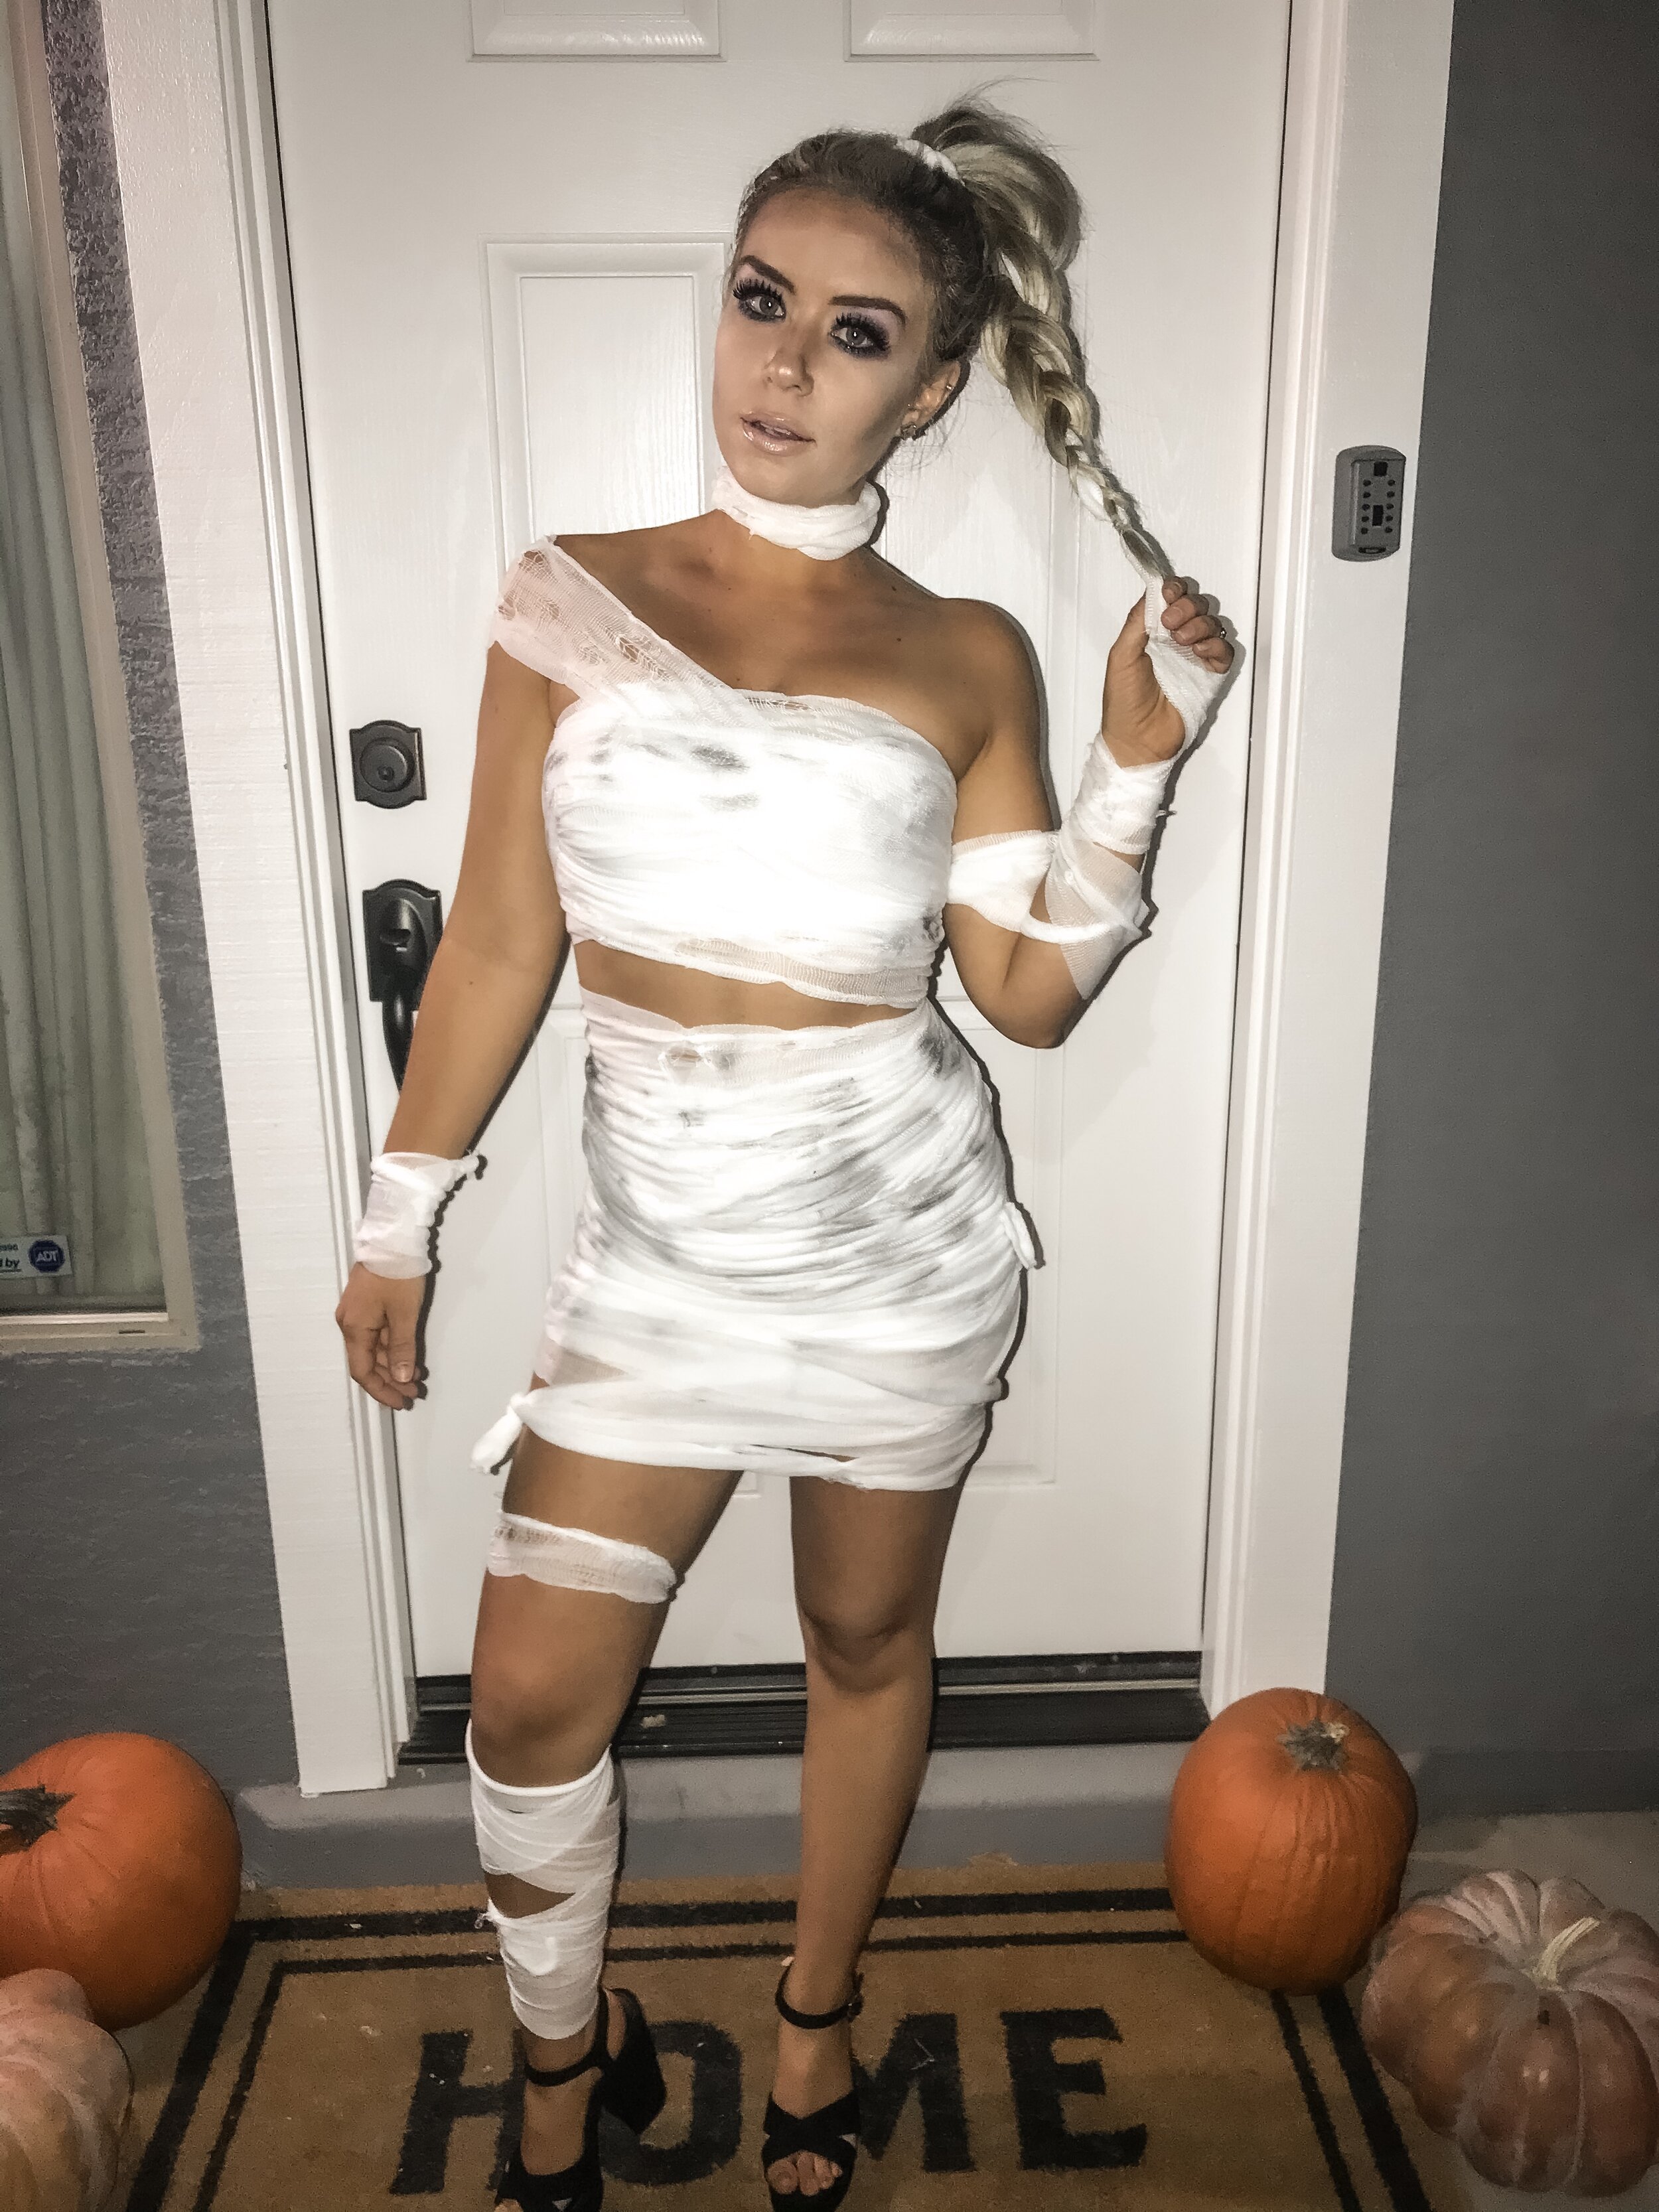 DIY Mummy Costume — Chelsey Brooke Fitness pic pic